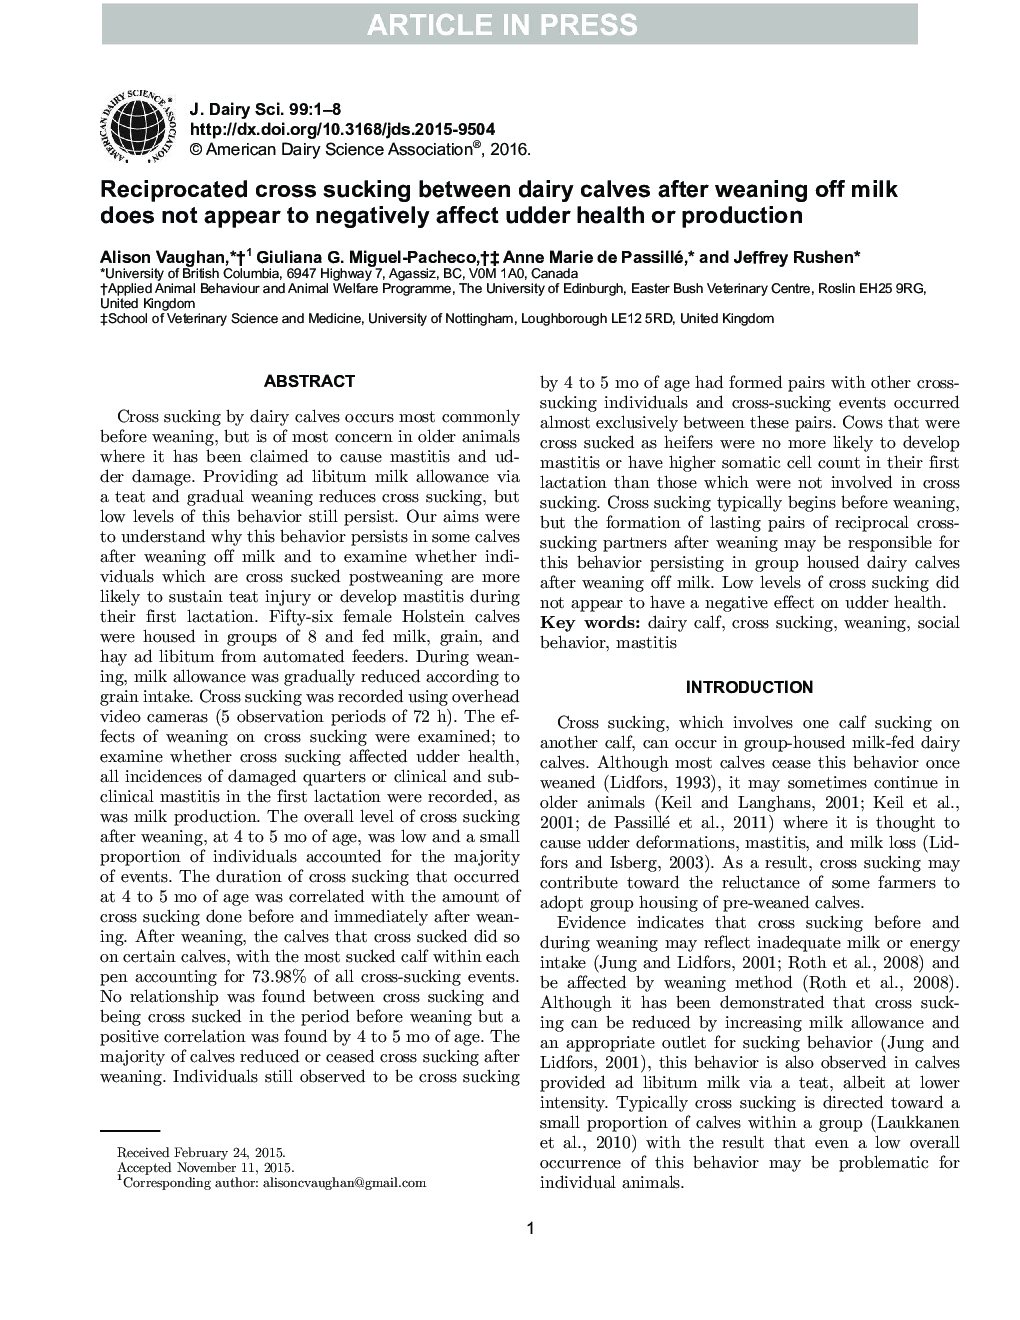 Reciprocated cross sucking between dairy calves after weaning off milk does not appear to negatively affect udder health or production